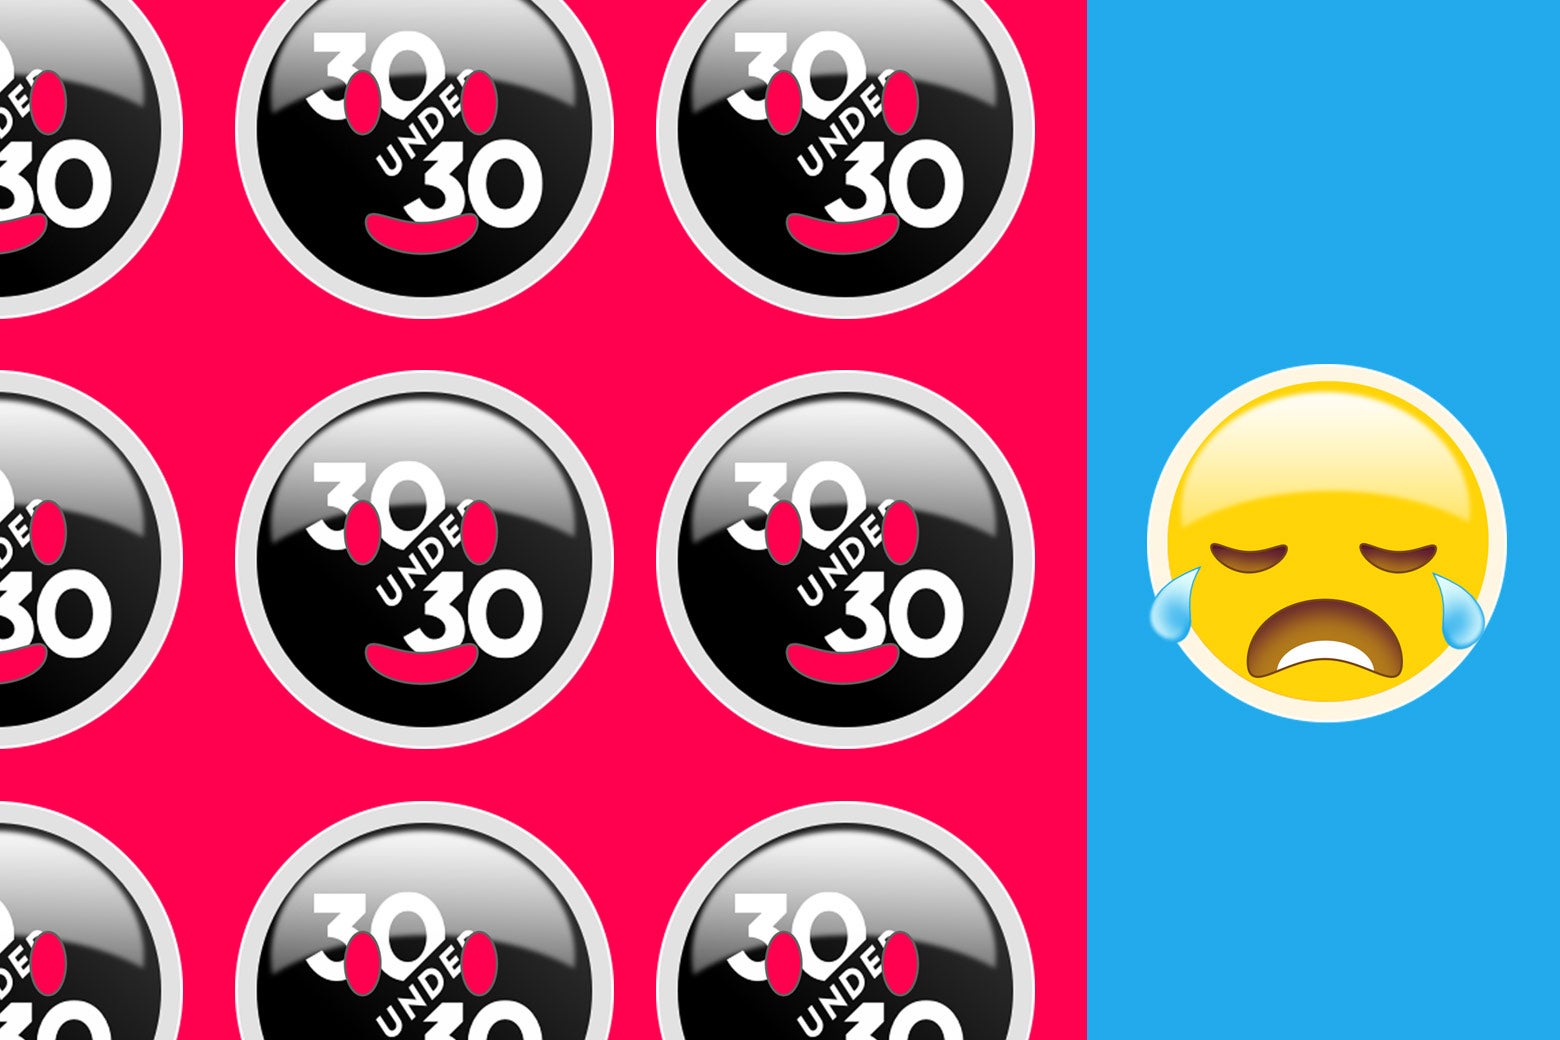 30 Over 30 logo with happy face emojis placed over it and one sad emoji with out the 30 Over 30.